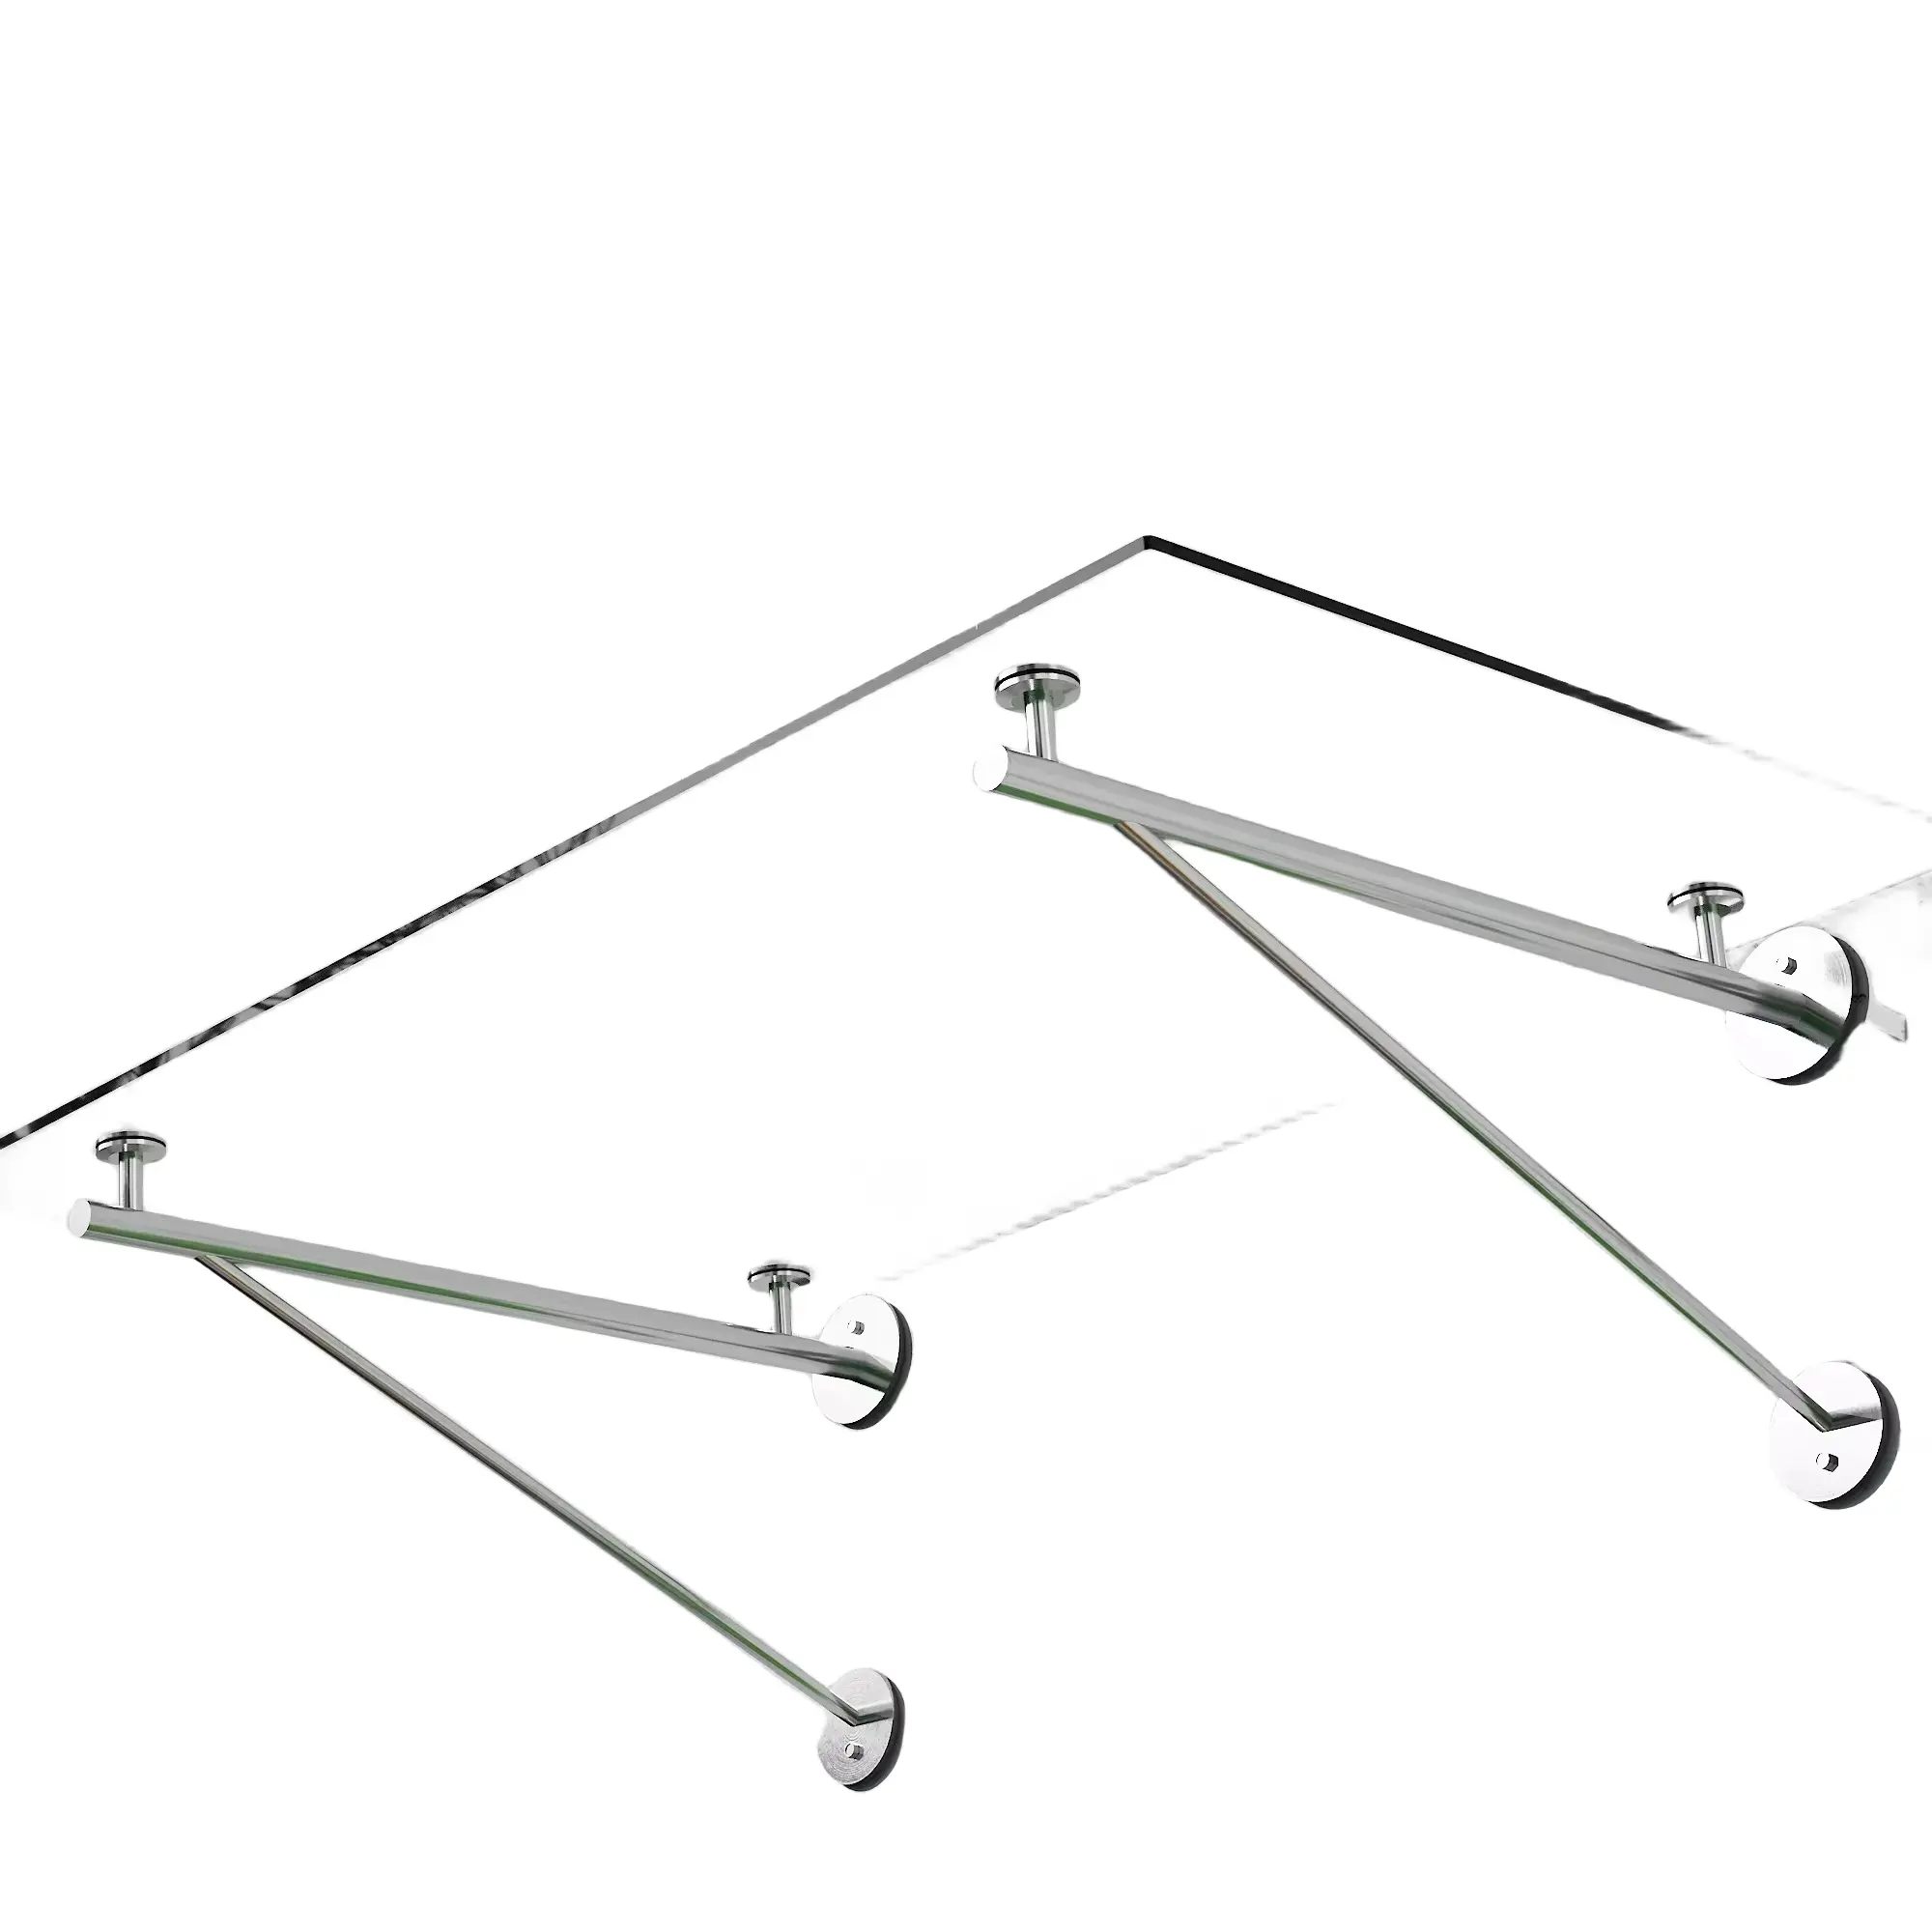 Glass Door Awning Heavy Duty Triangle Brackets Canopy 304 Stainless Steel Entrance Glass Simple Adjustable Optional Winter